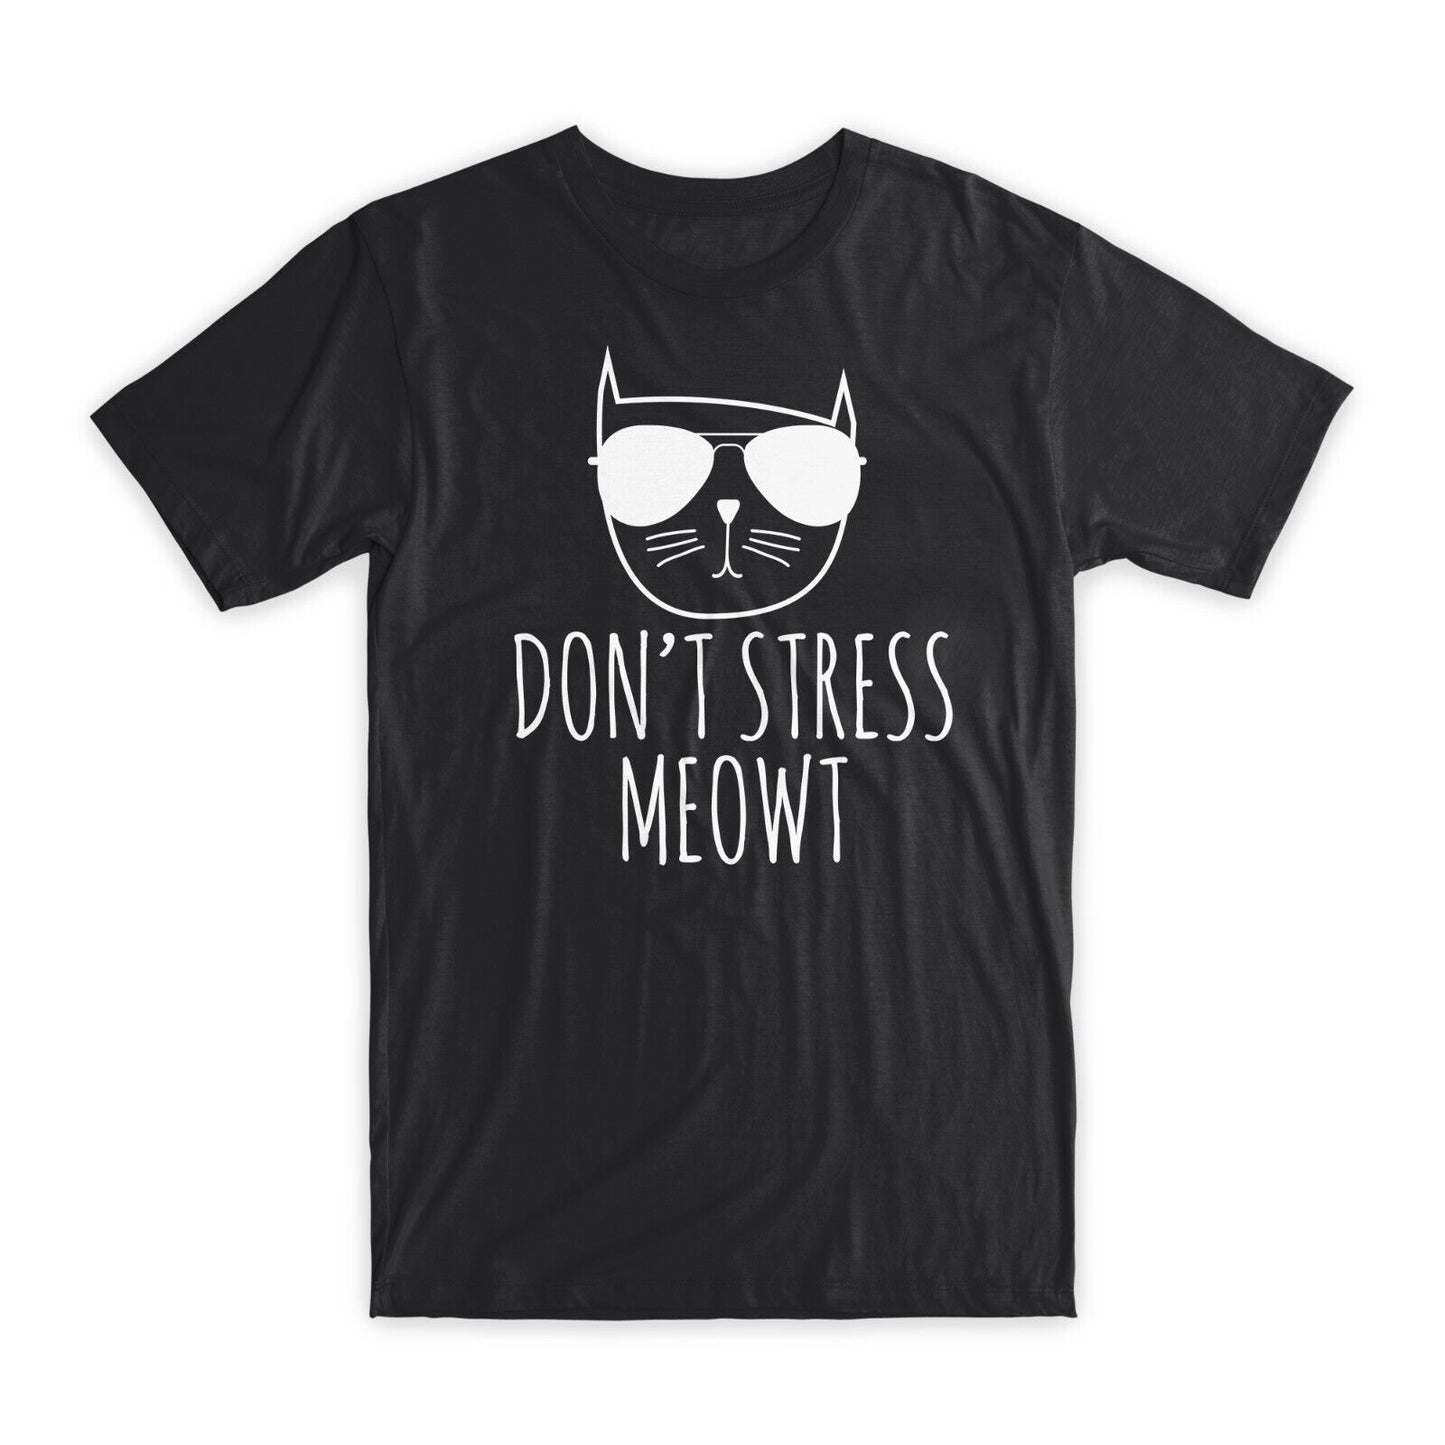 Don't Stress Meowt T-Shirt Premium Soft Cotton Crew Neck Funny Tees Gifts NEW